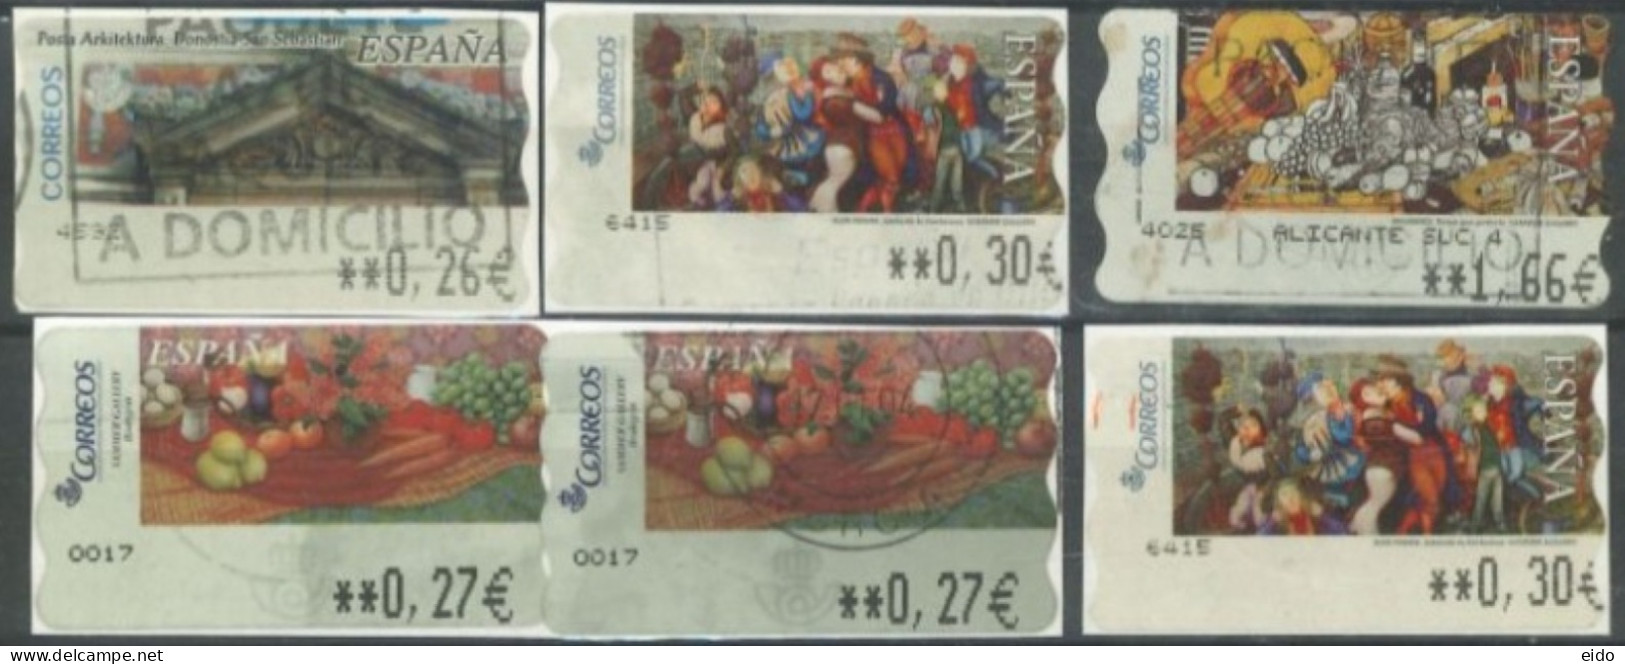 SPAIN- 2003/04,SAN SABASTIAN ARCH. AND SAMMER GALLERY STAMPS LABELS SET OF 6, DIFFERENT VALUES, USED. - Usati